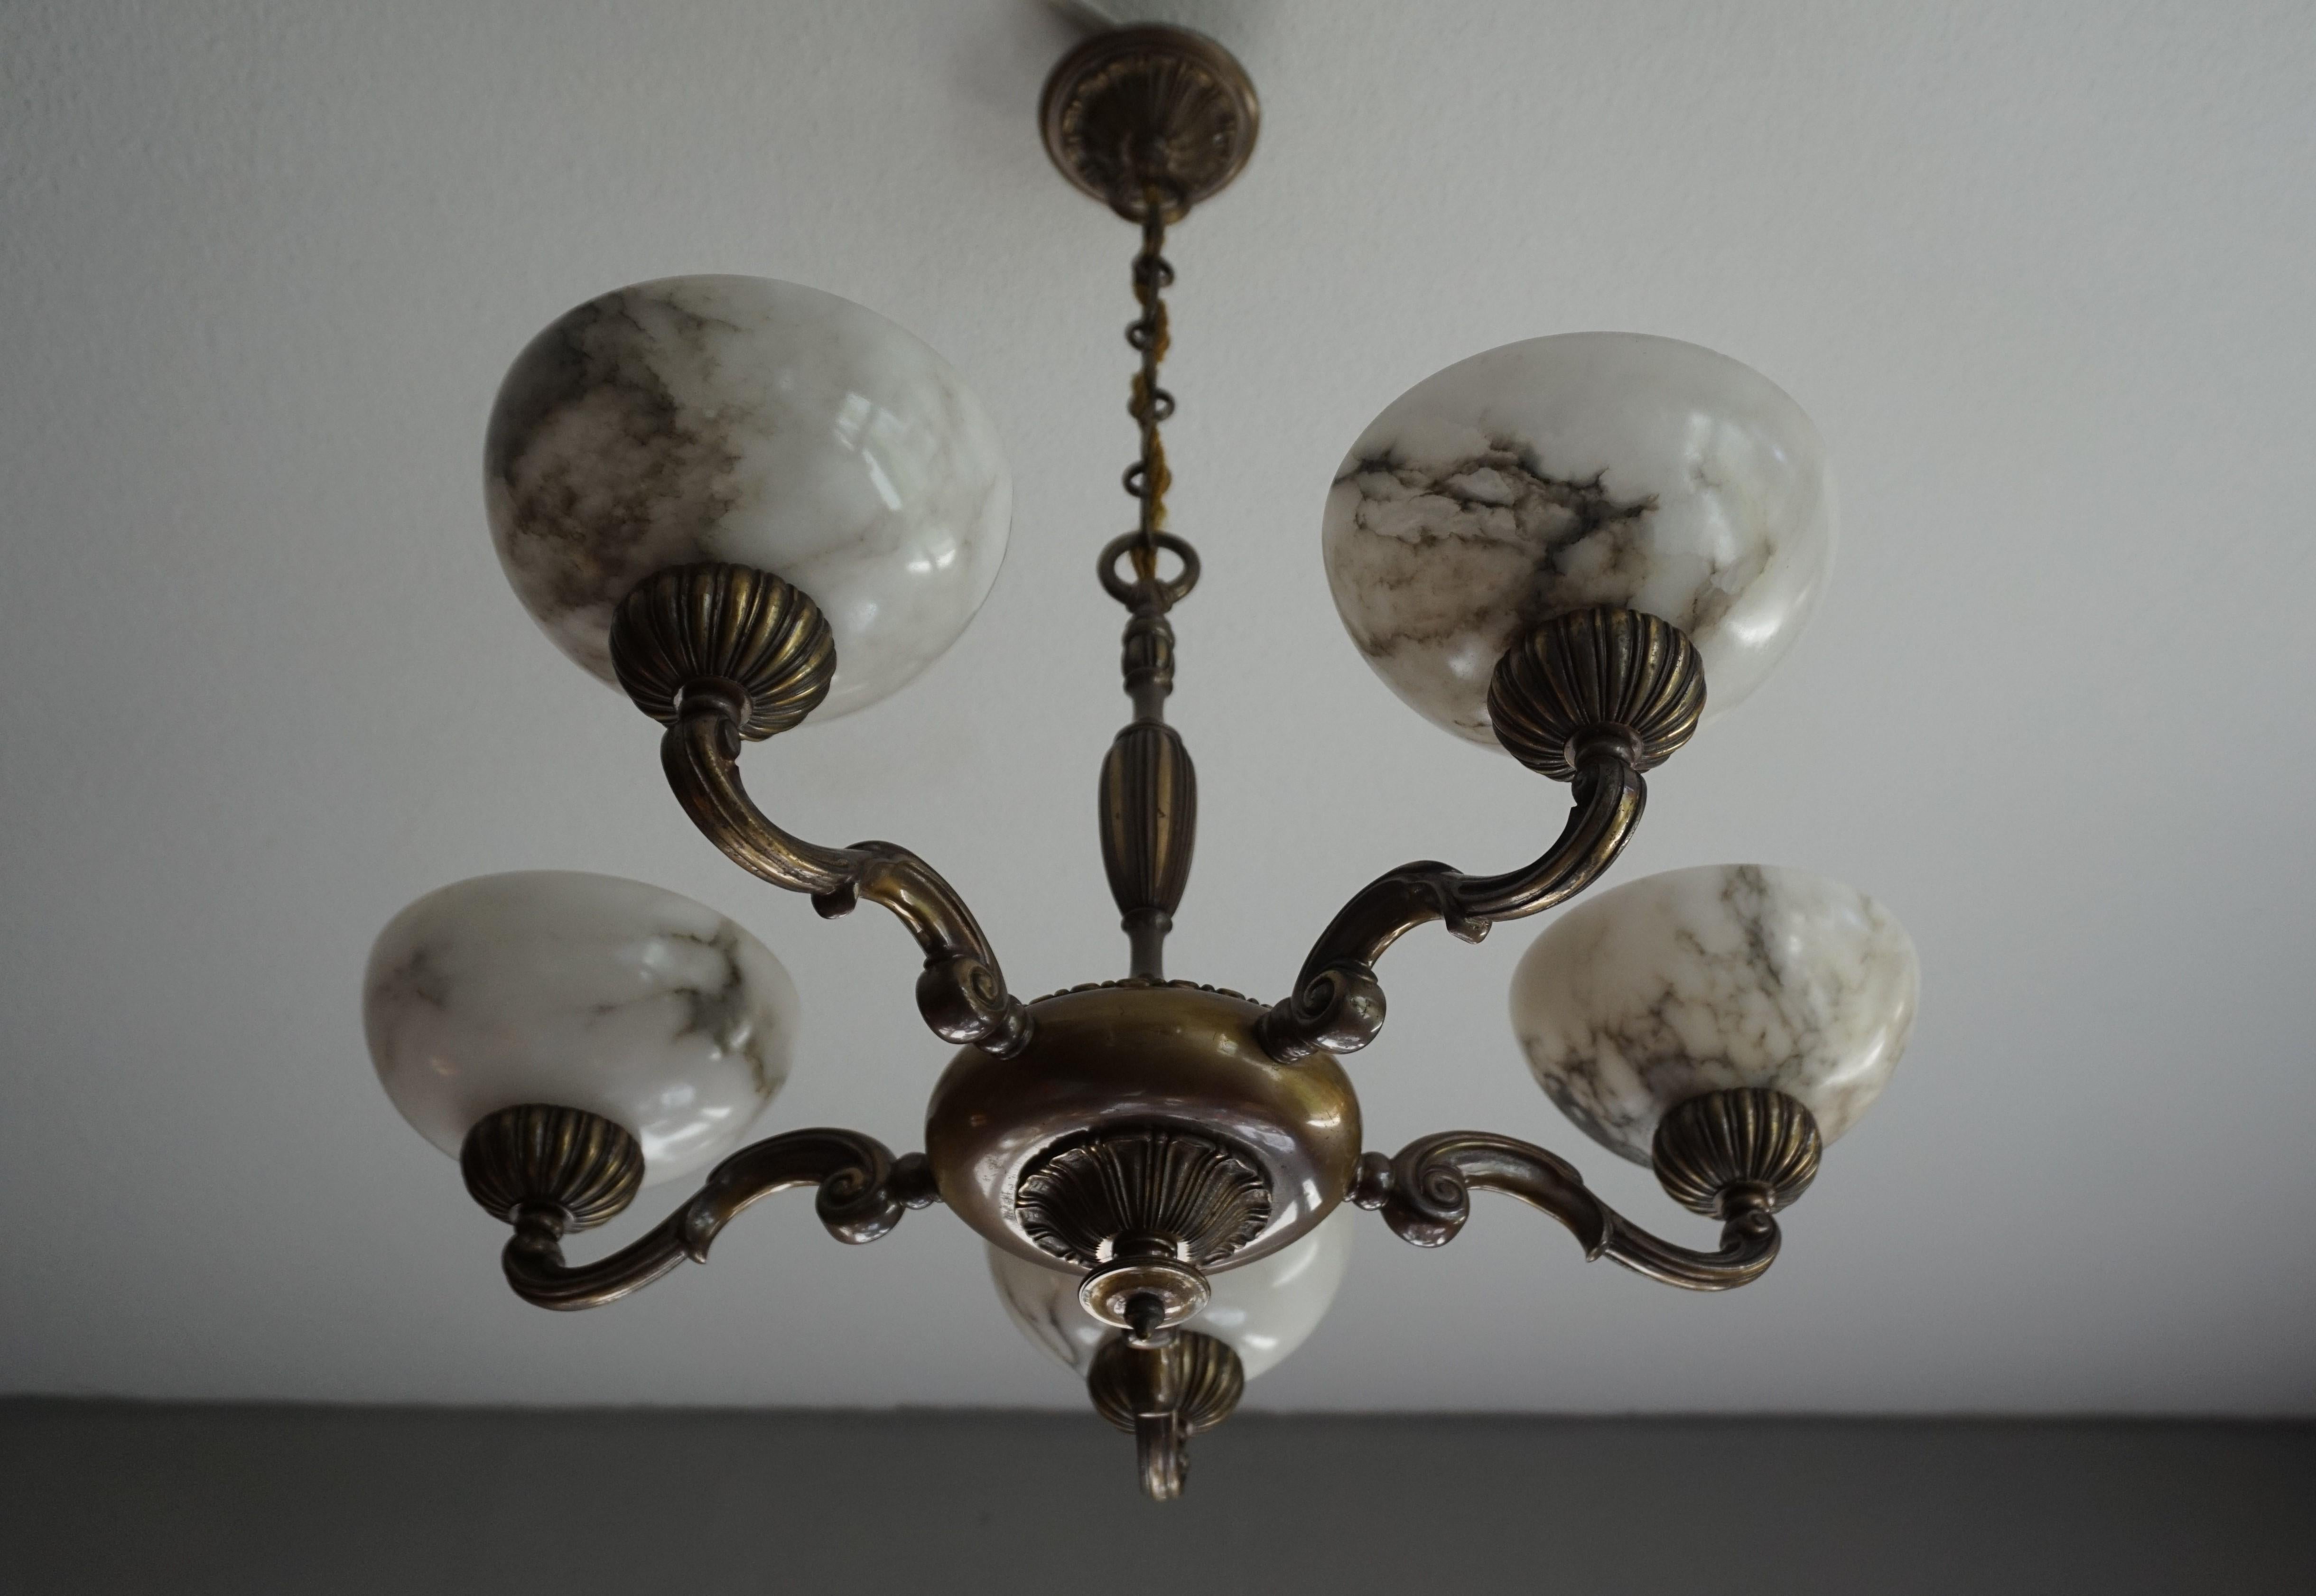 Patinated Beautiful Looking Classical Style Brass and Alabaster Chandelier / Light Fixture